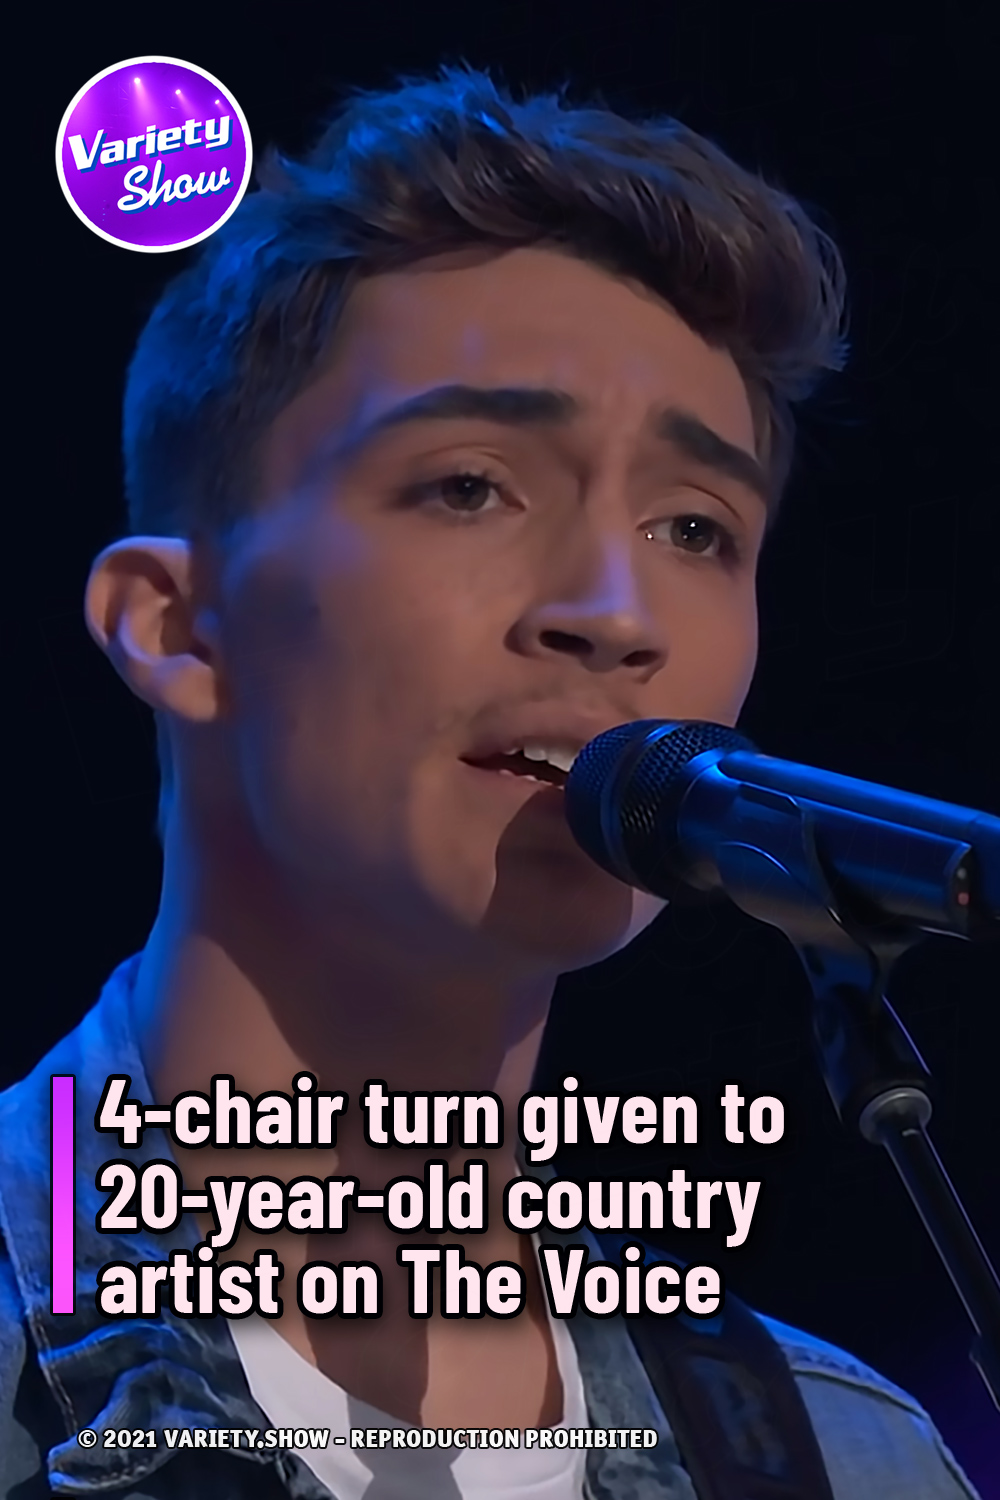 4-chair turn given to 20-year-old country artist on The Voice